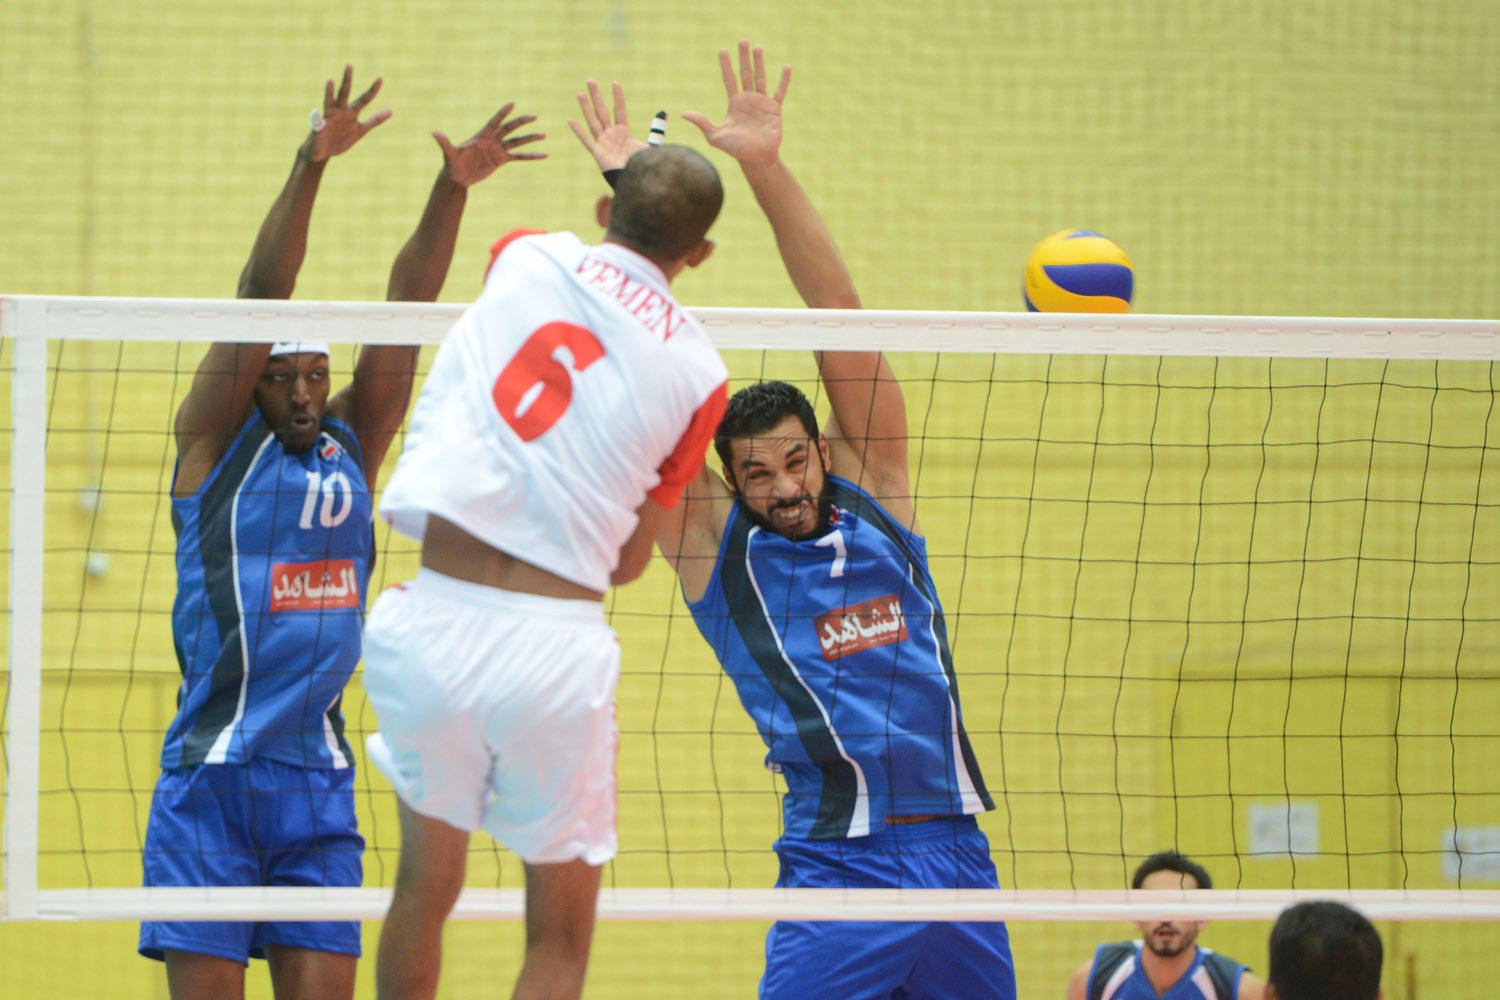 Kuwait clinched a three straight-set victory over Yemen in their first game of the Arab Men's Volleyball Championship